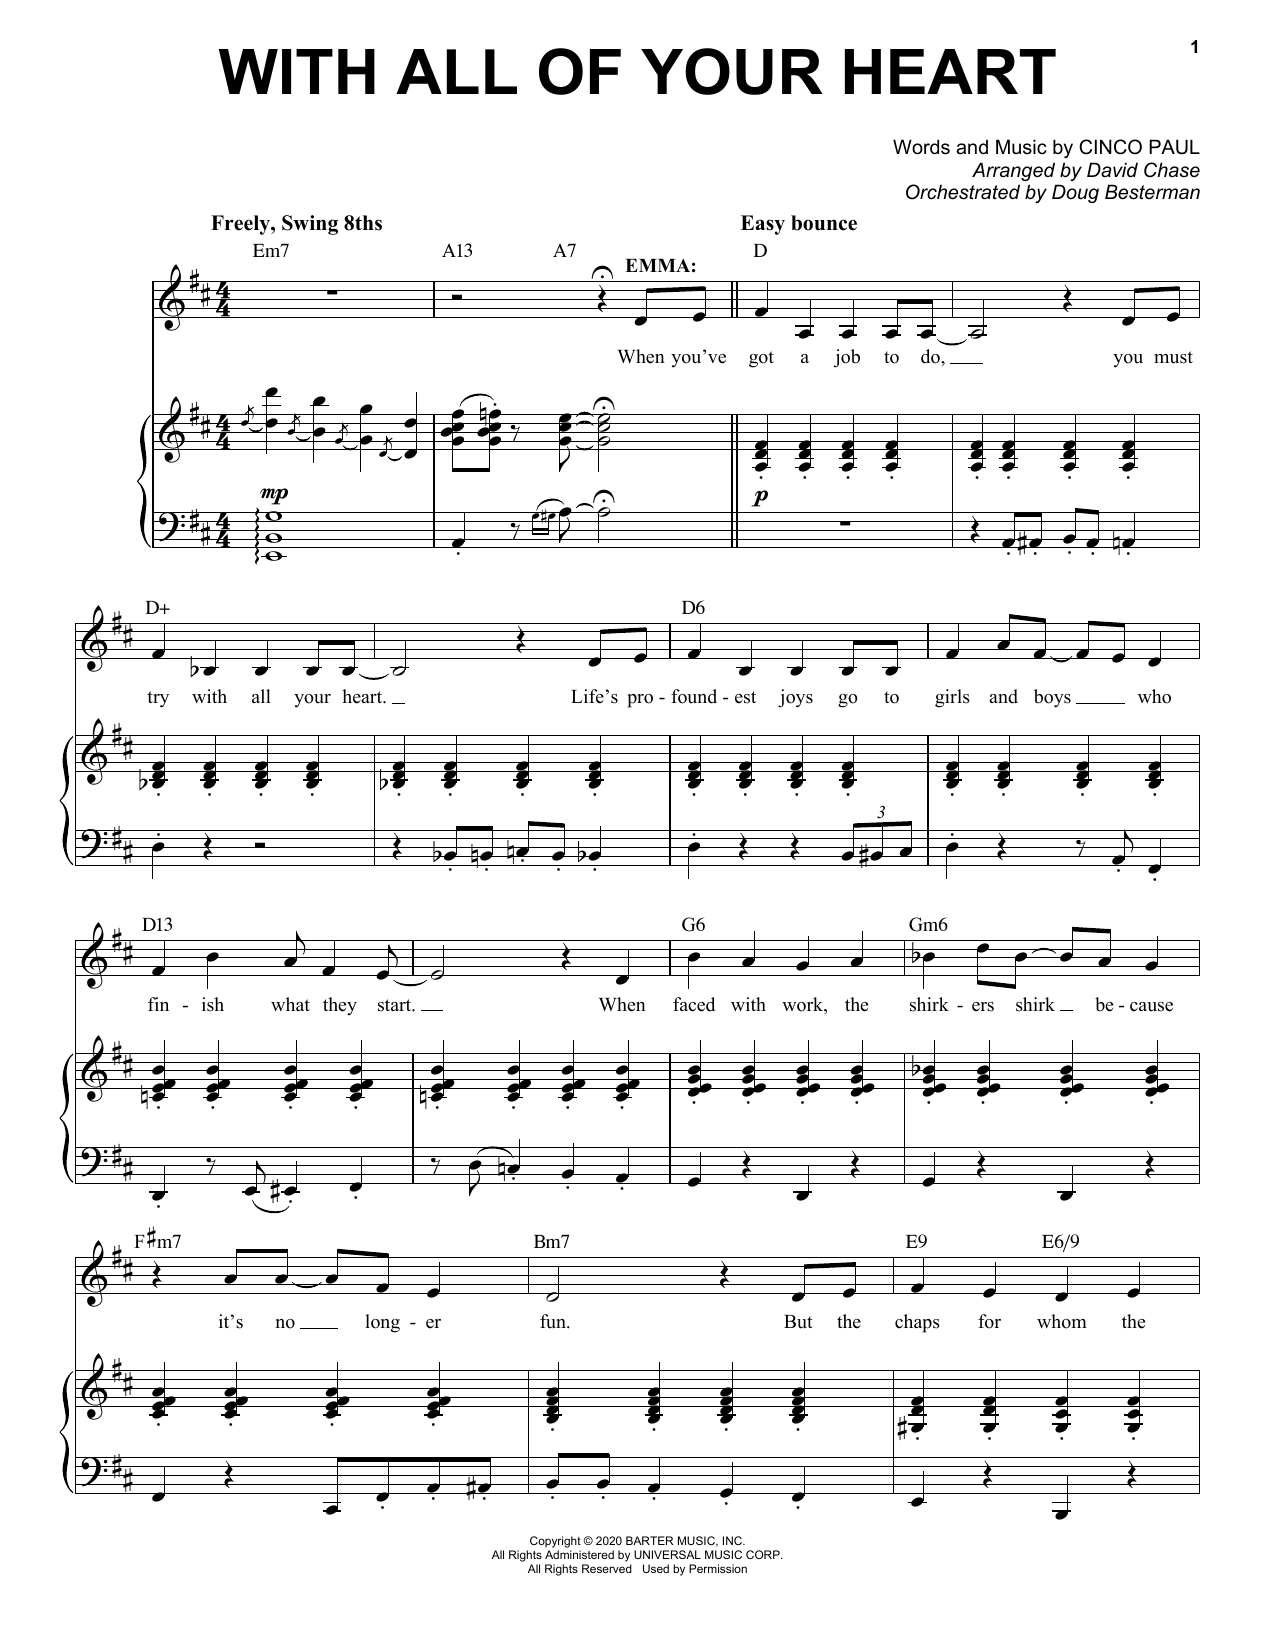 Download Cinco Paul With All Of Your Heart (from Schmigadoo Sheet Music